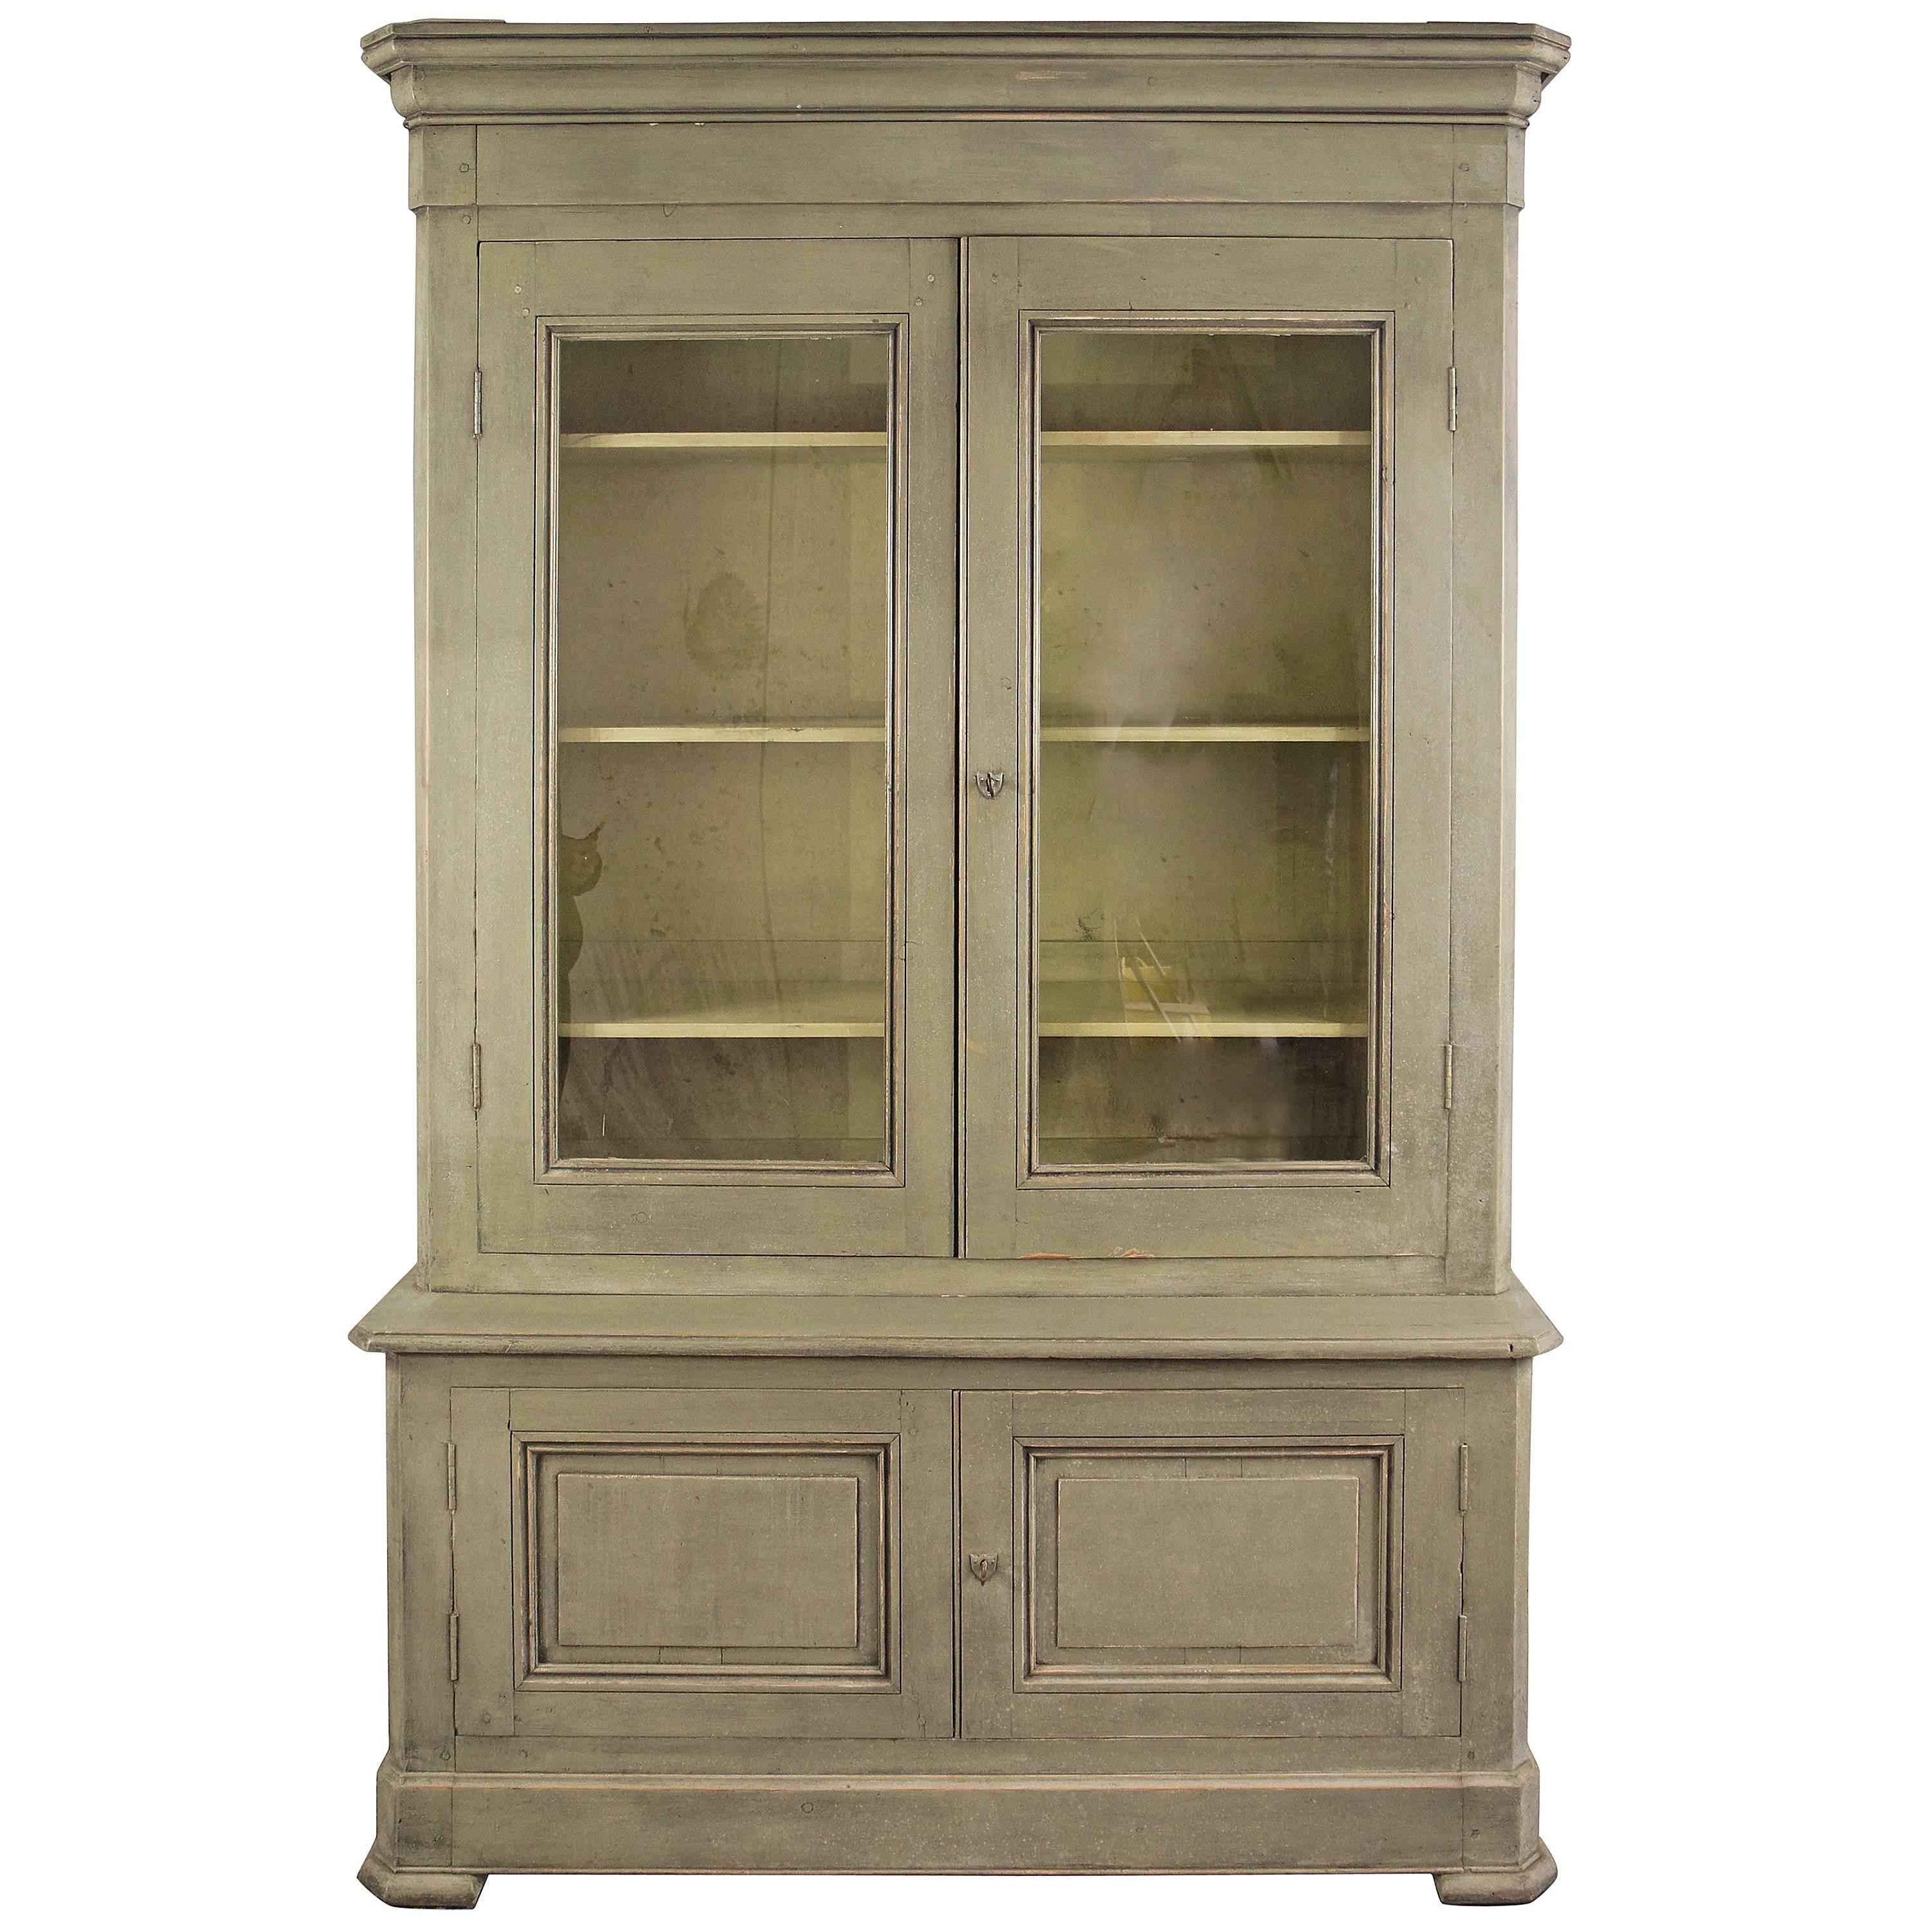 19th Century French Painted Pine Cupboard Bookcase Dresser Display Cabinet  For Sale